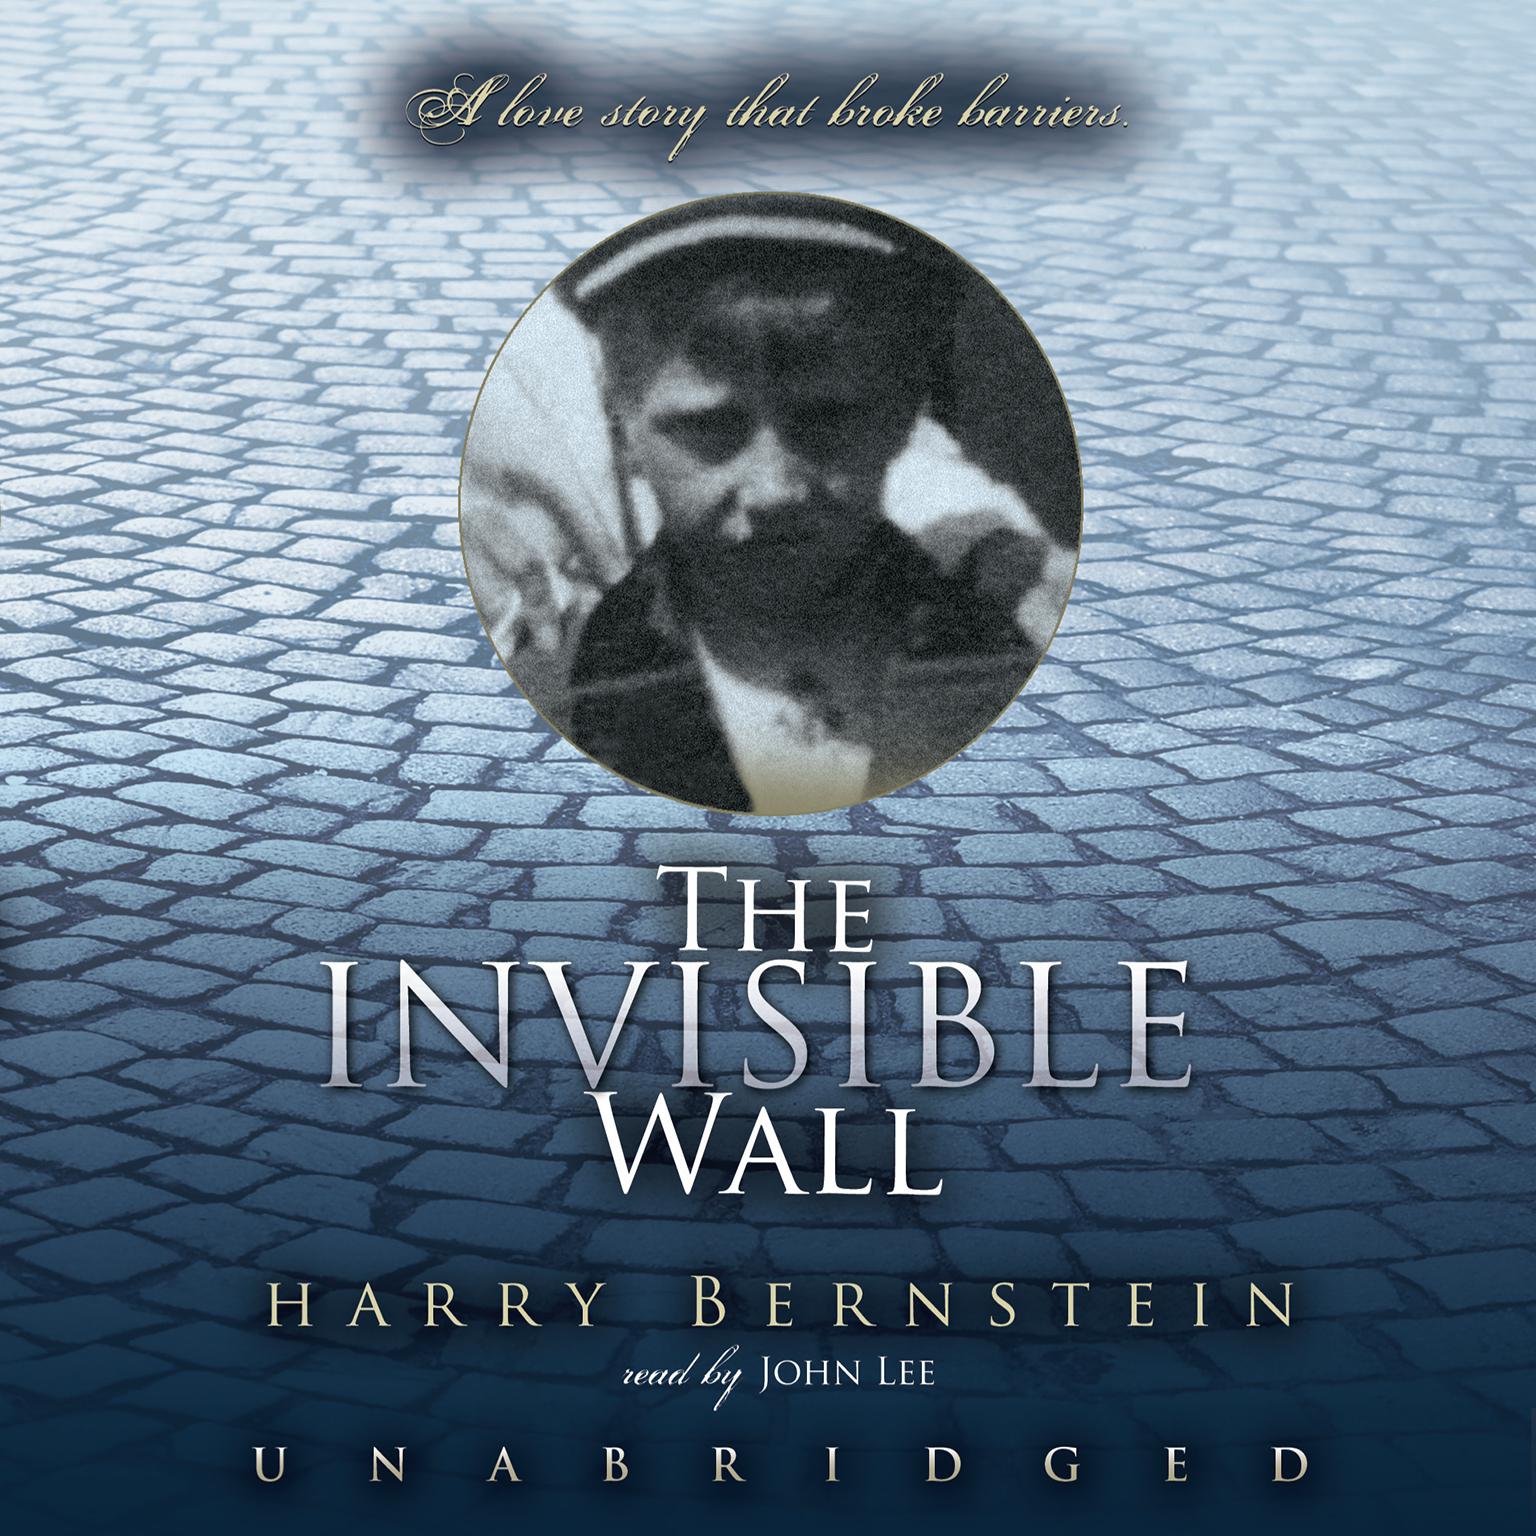 The Invisible Wall: A Love Story That Broke Barriers Audiobook, by Harry Bernstein